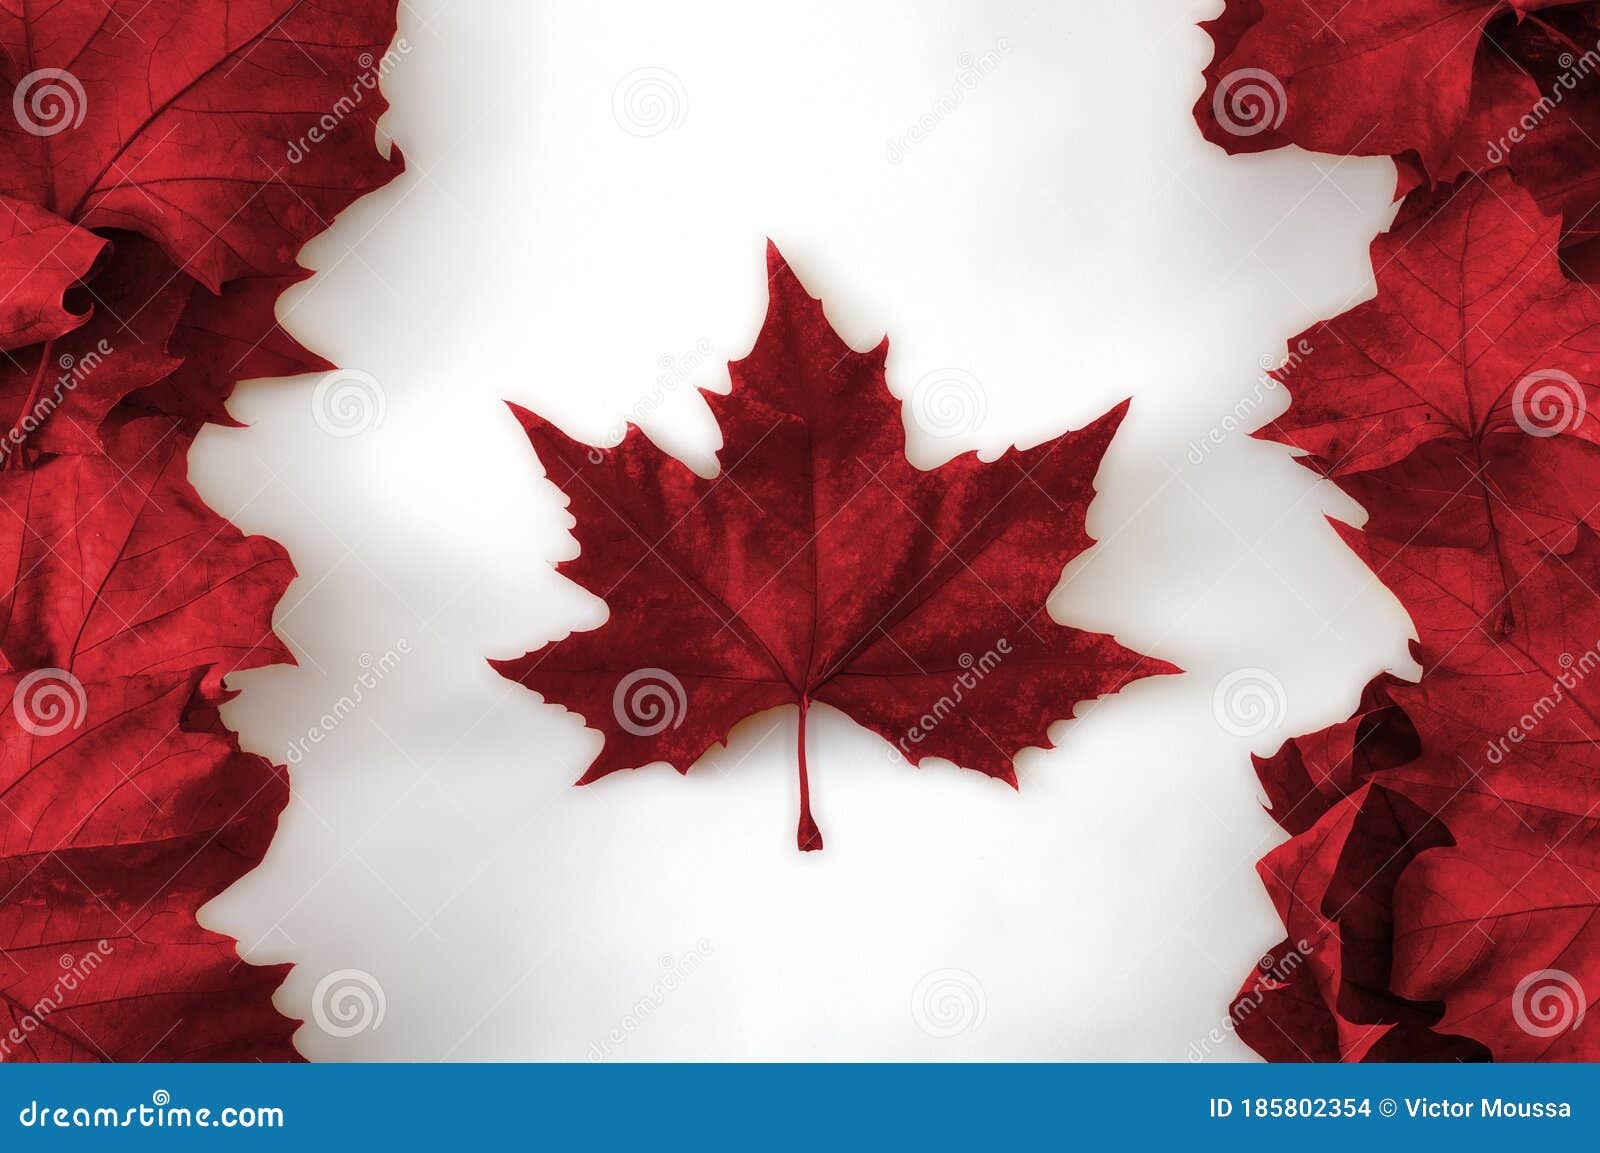 canada day background with maple leafs and canada flag happy